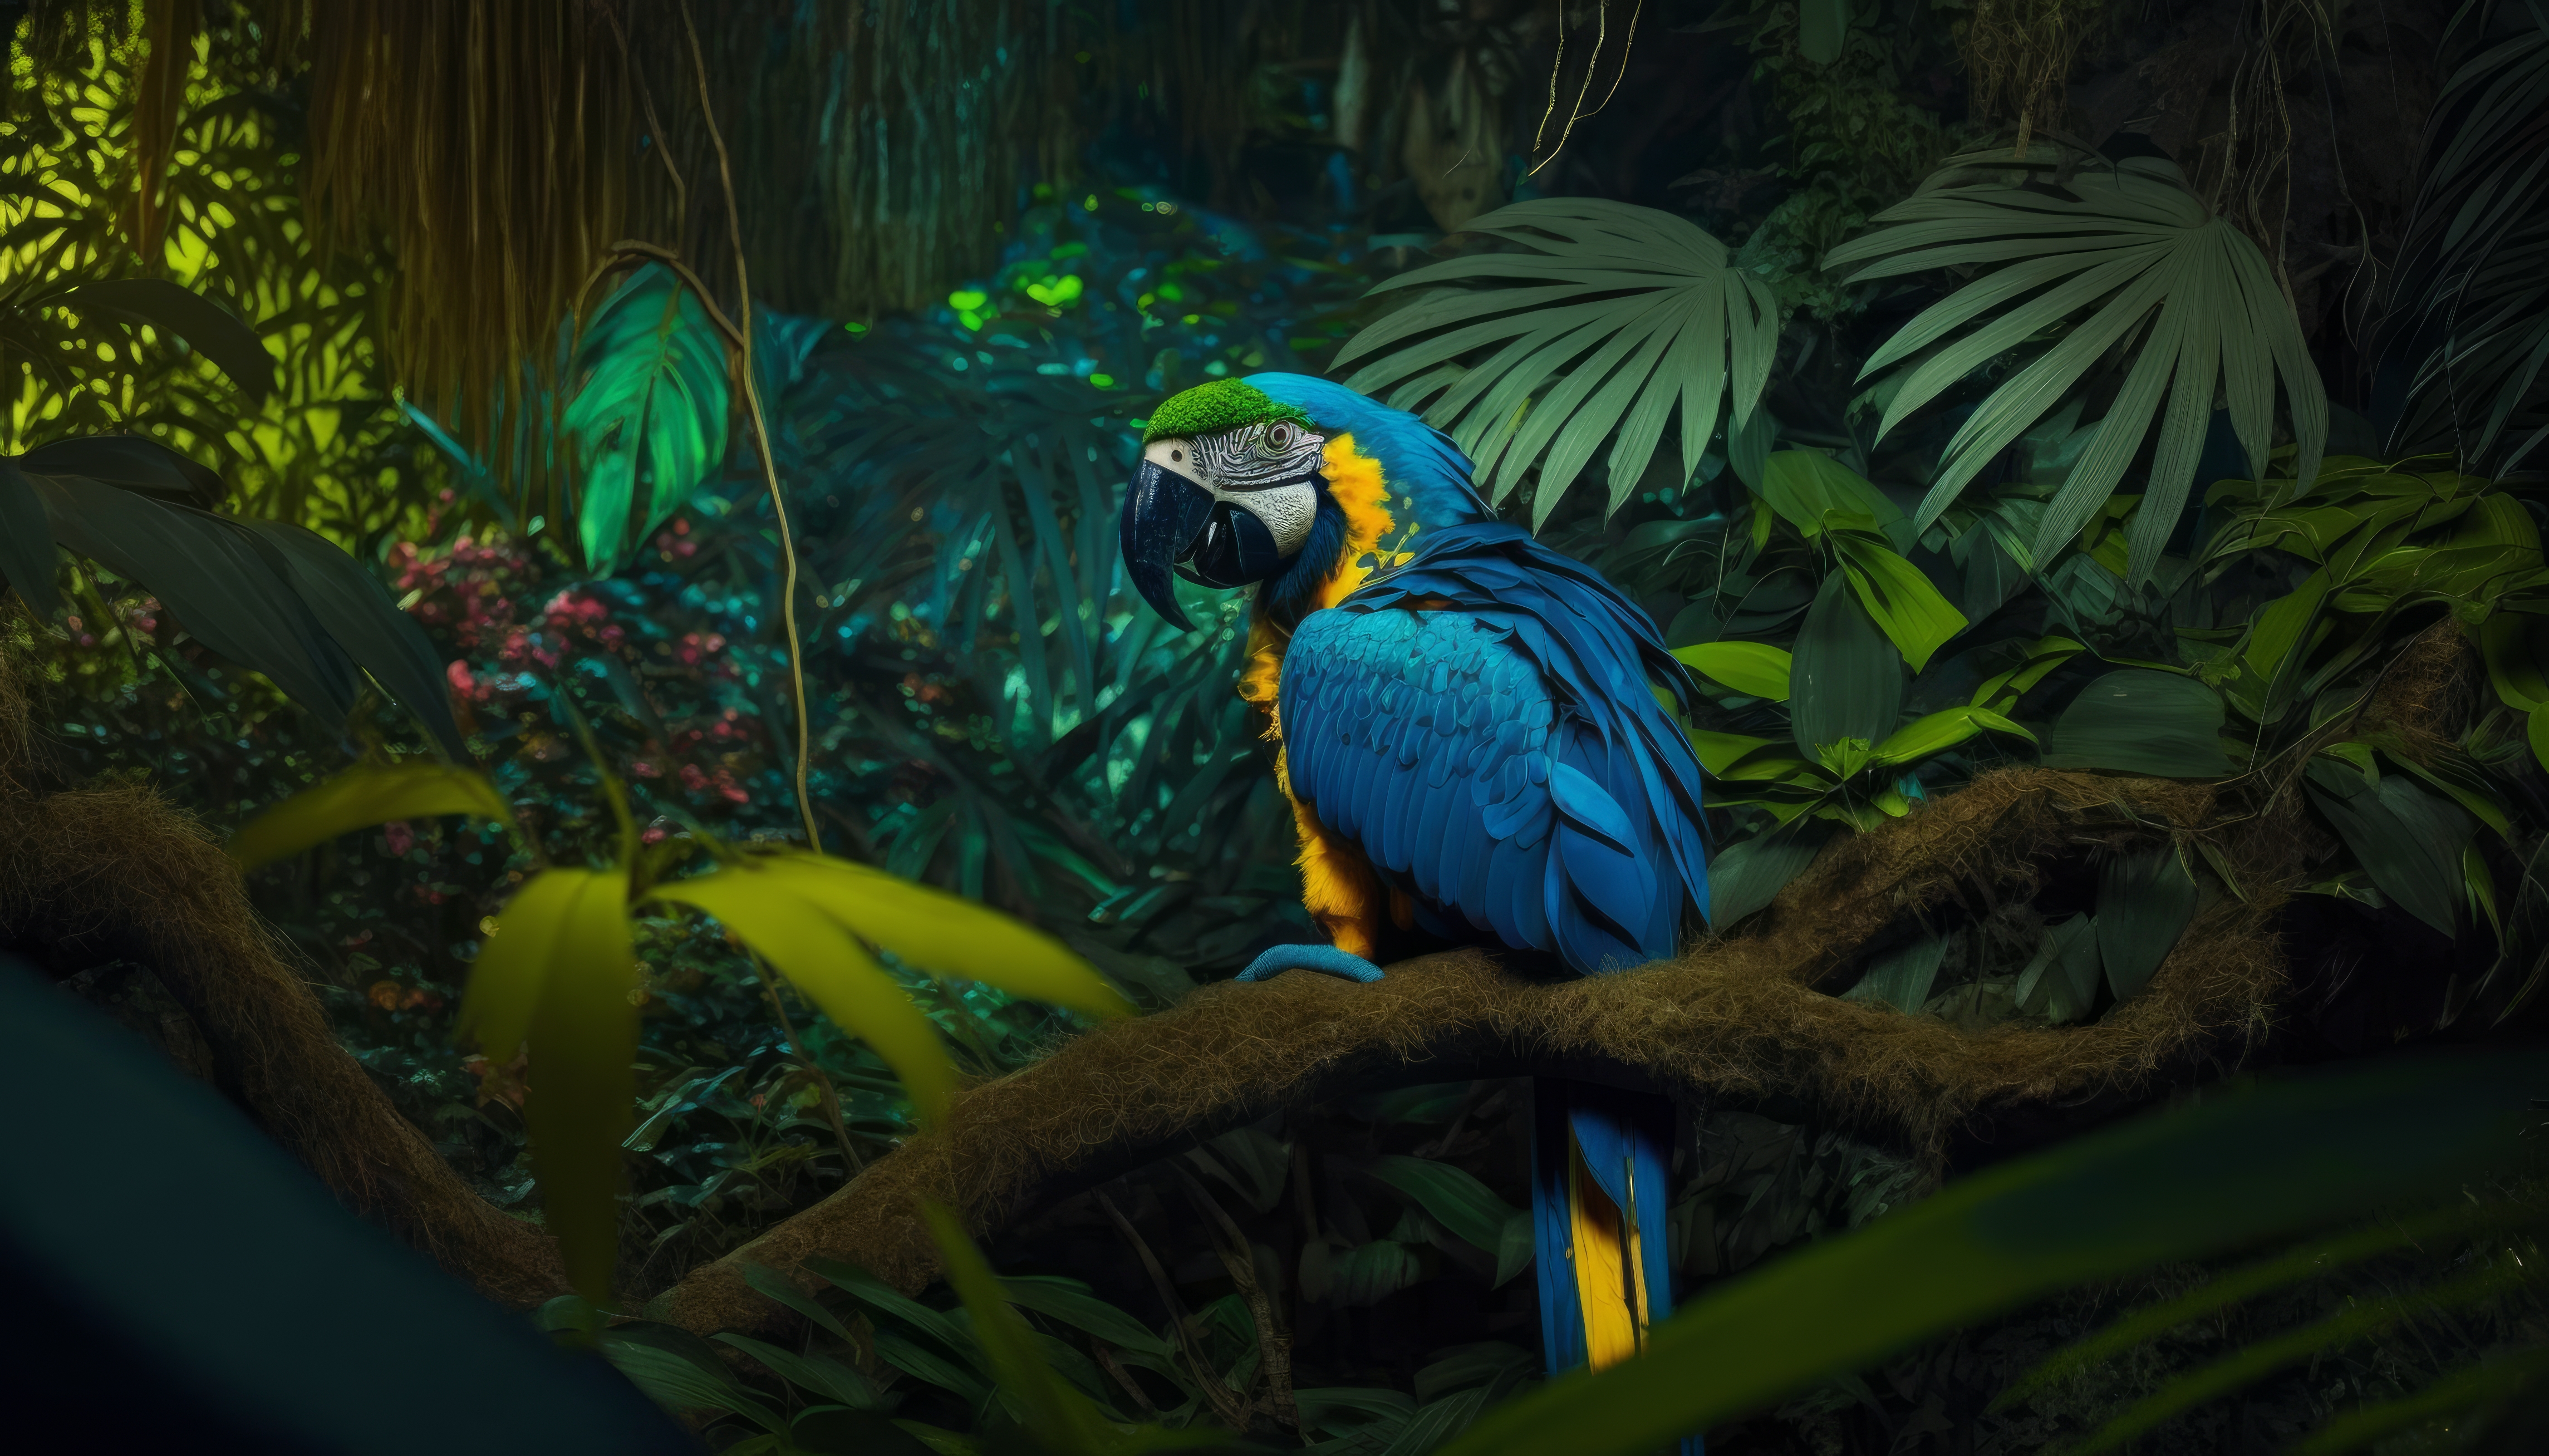 General 4579x2616 AI art parrot jungle animals nature leaves branch macaws Blue-and-Yellow Macaw